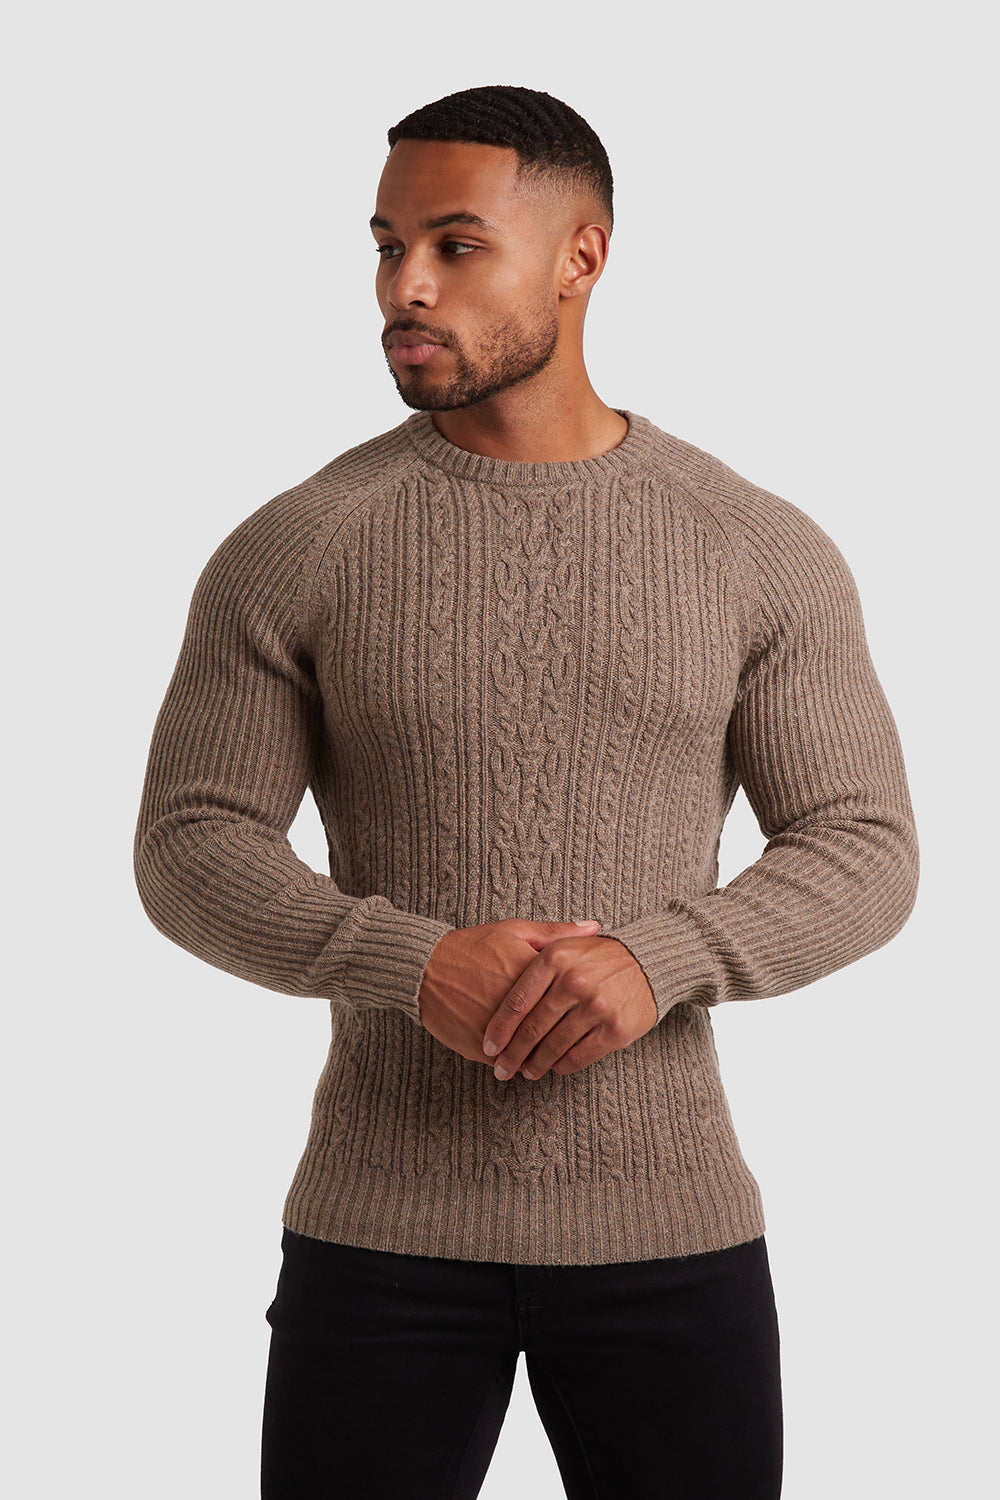 Cable Knit (LS) in Dark Oatmeal - TAILORED ATHLETE - ROW